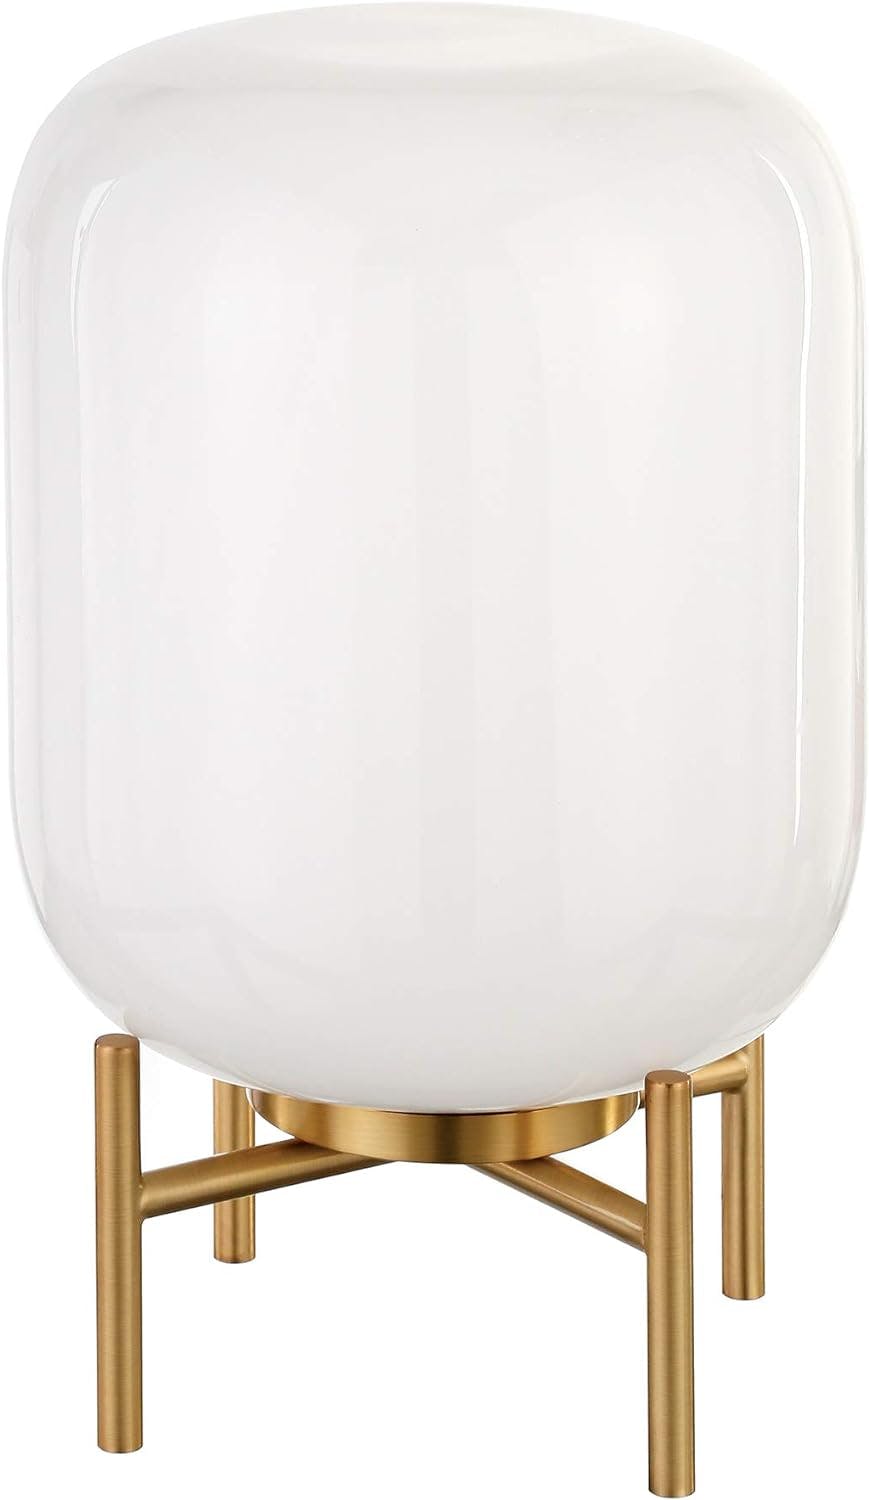 Edison 15.38" Brass Industrial Table Lamp with White Glass Globe